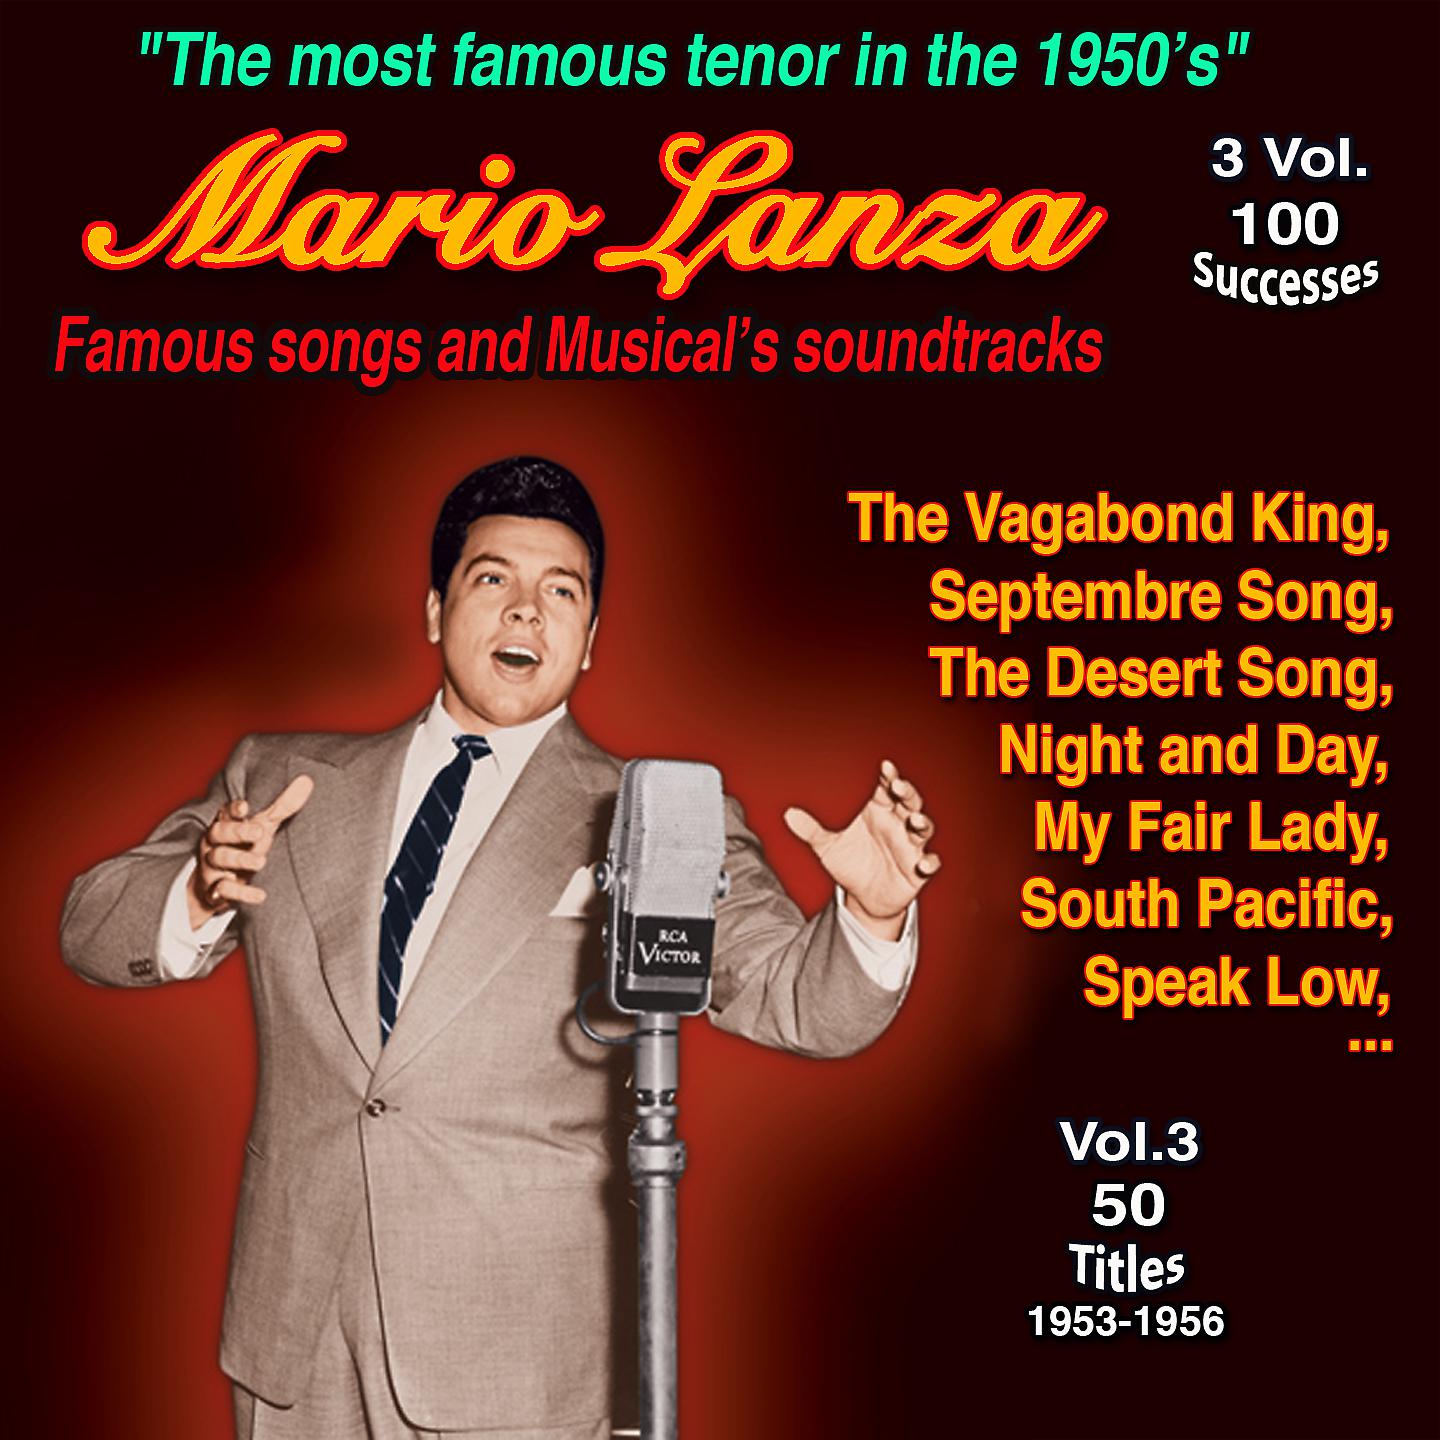 Постер альбома "The Most Famous Tenor in the 1950's": Mario Lanza - 3 Vol. 100 Successes